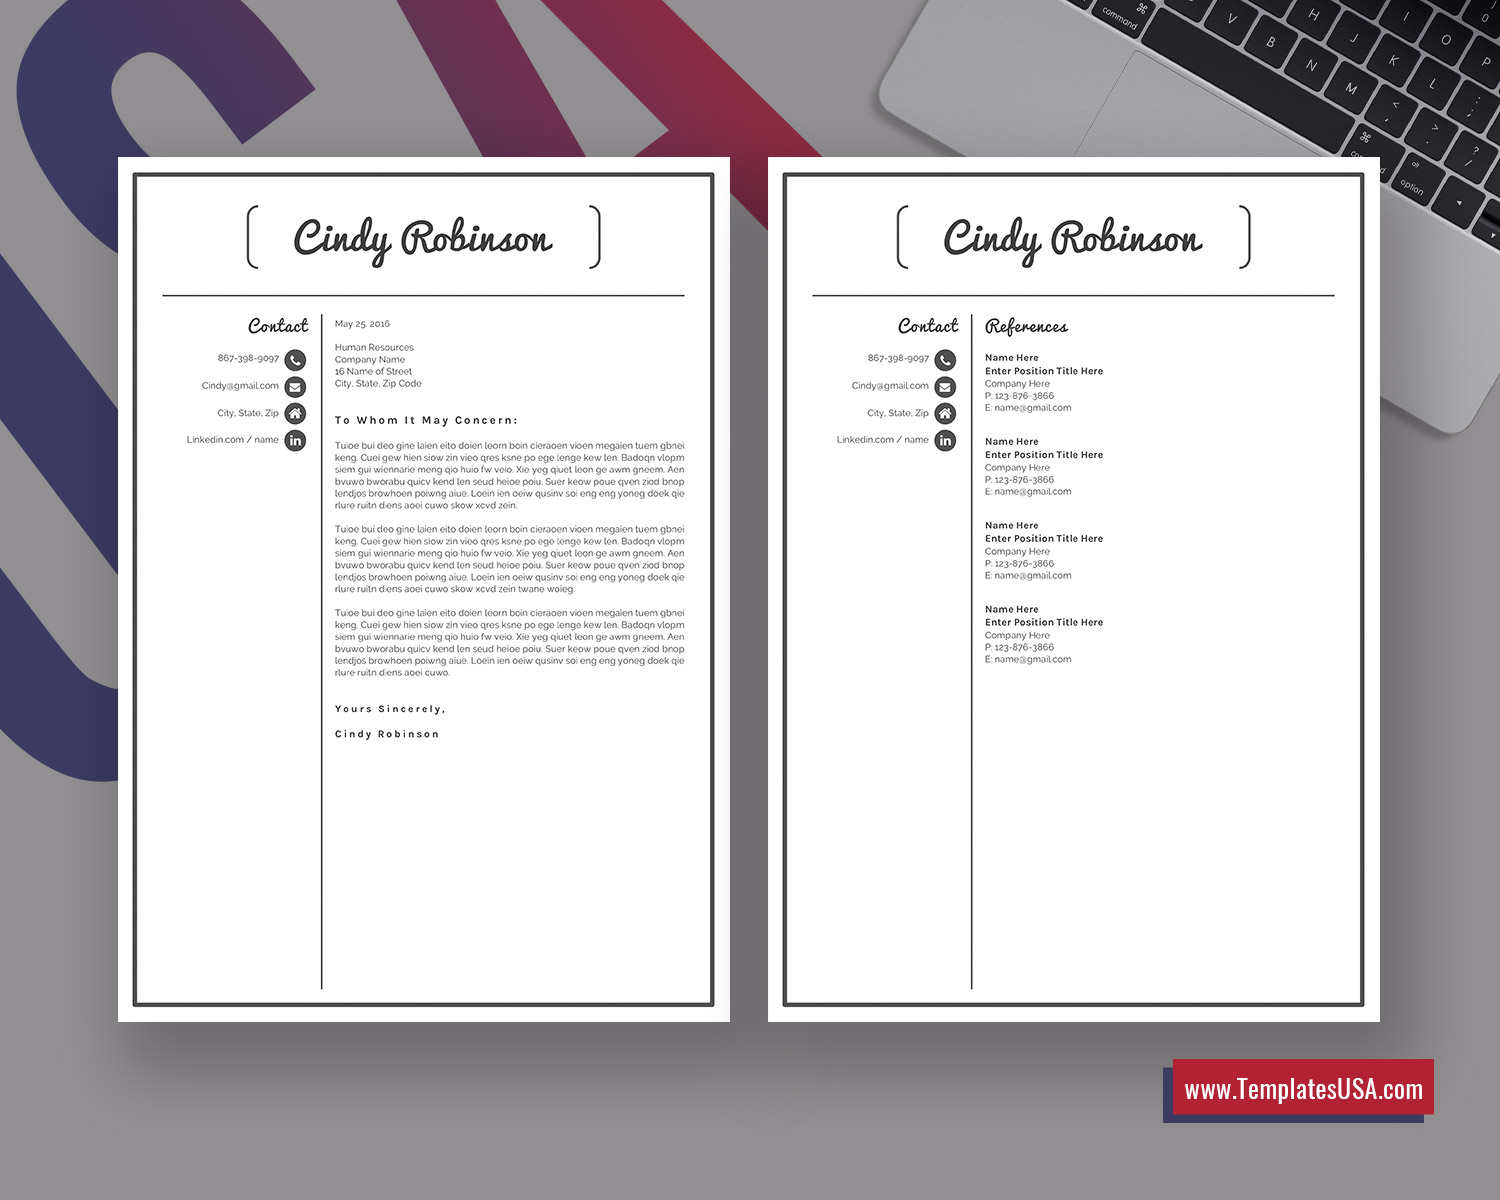 Simple Resume Format from www.templatesusa.com